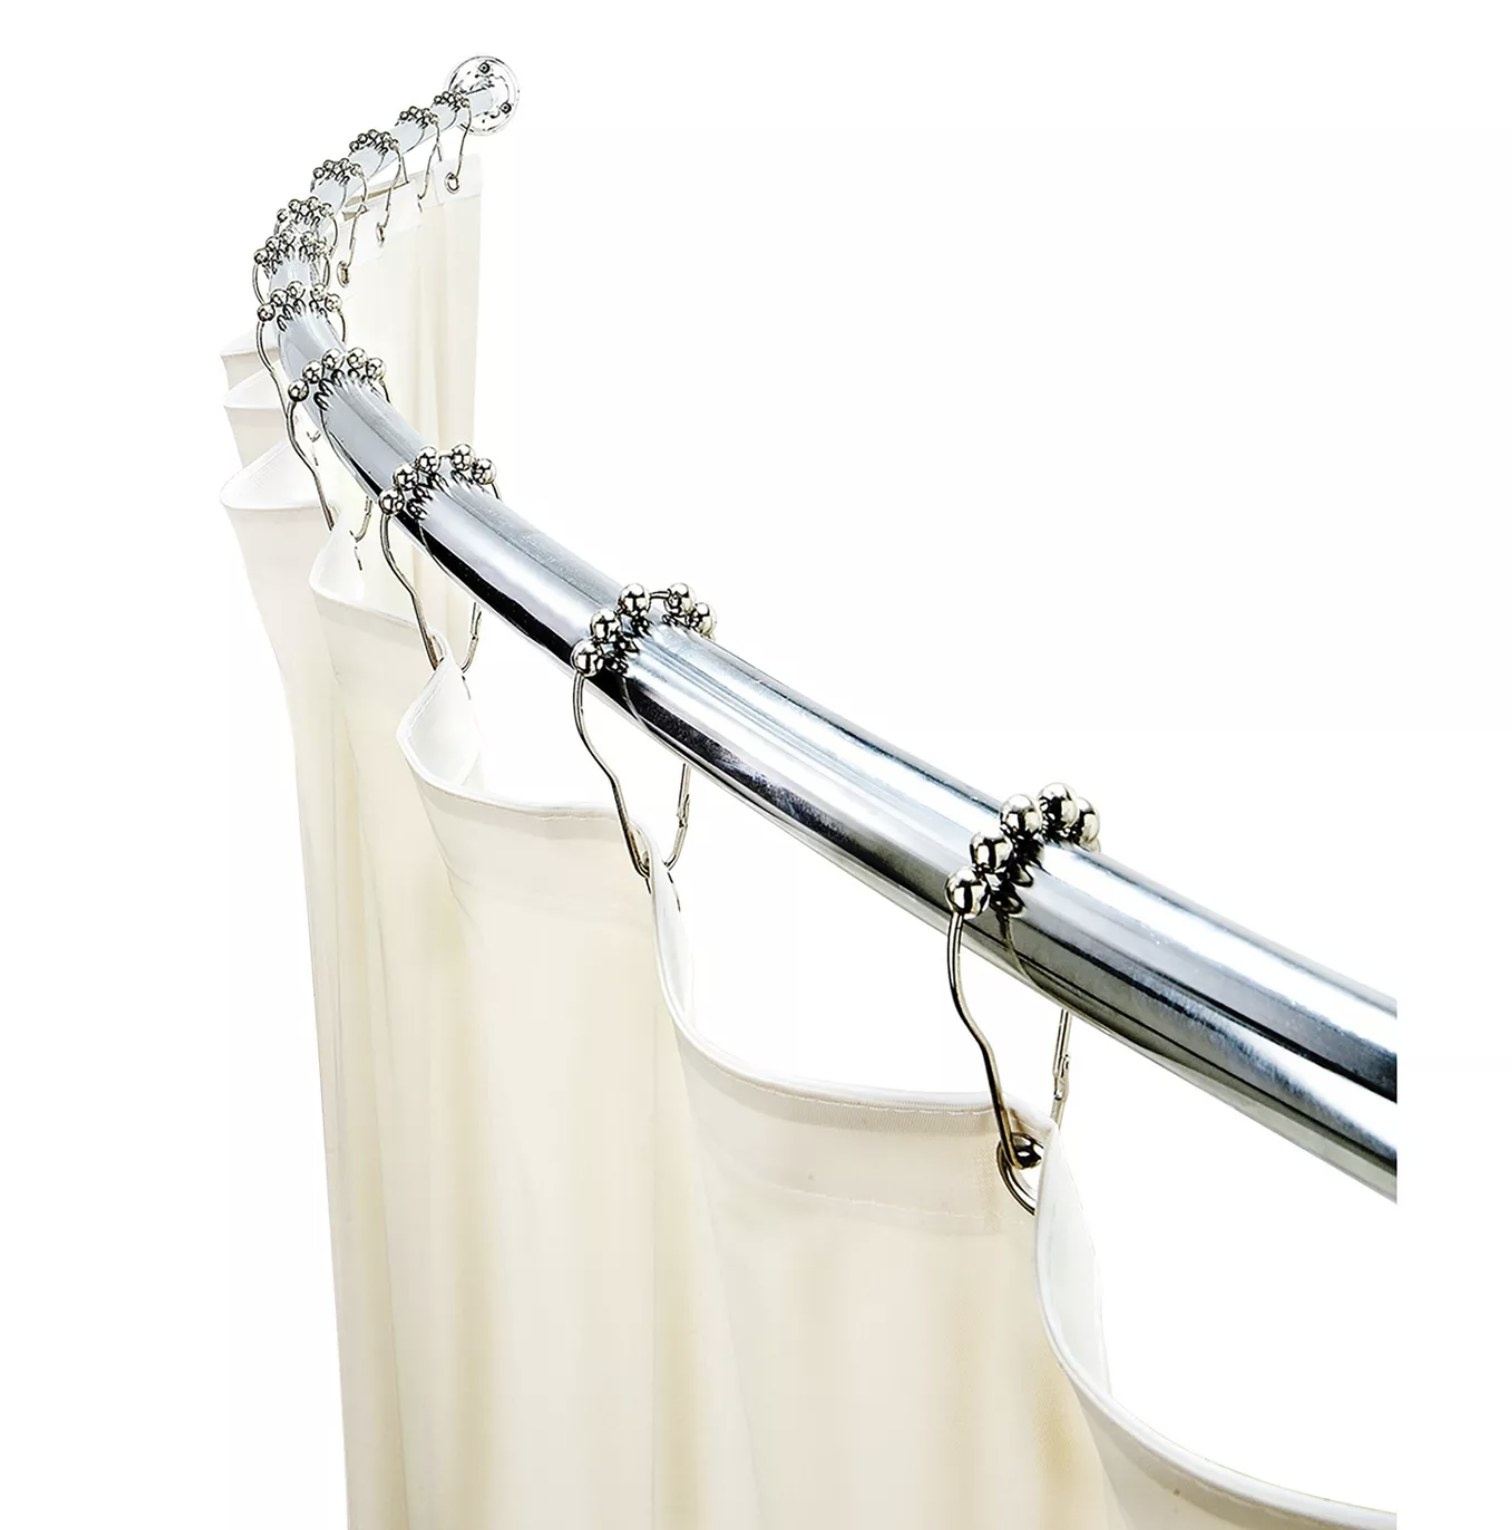 A curved shower rod 